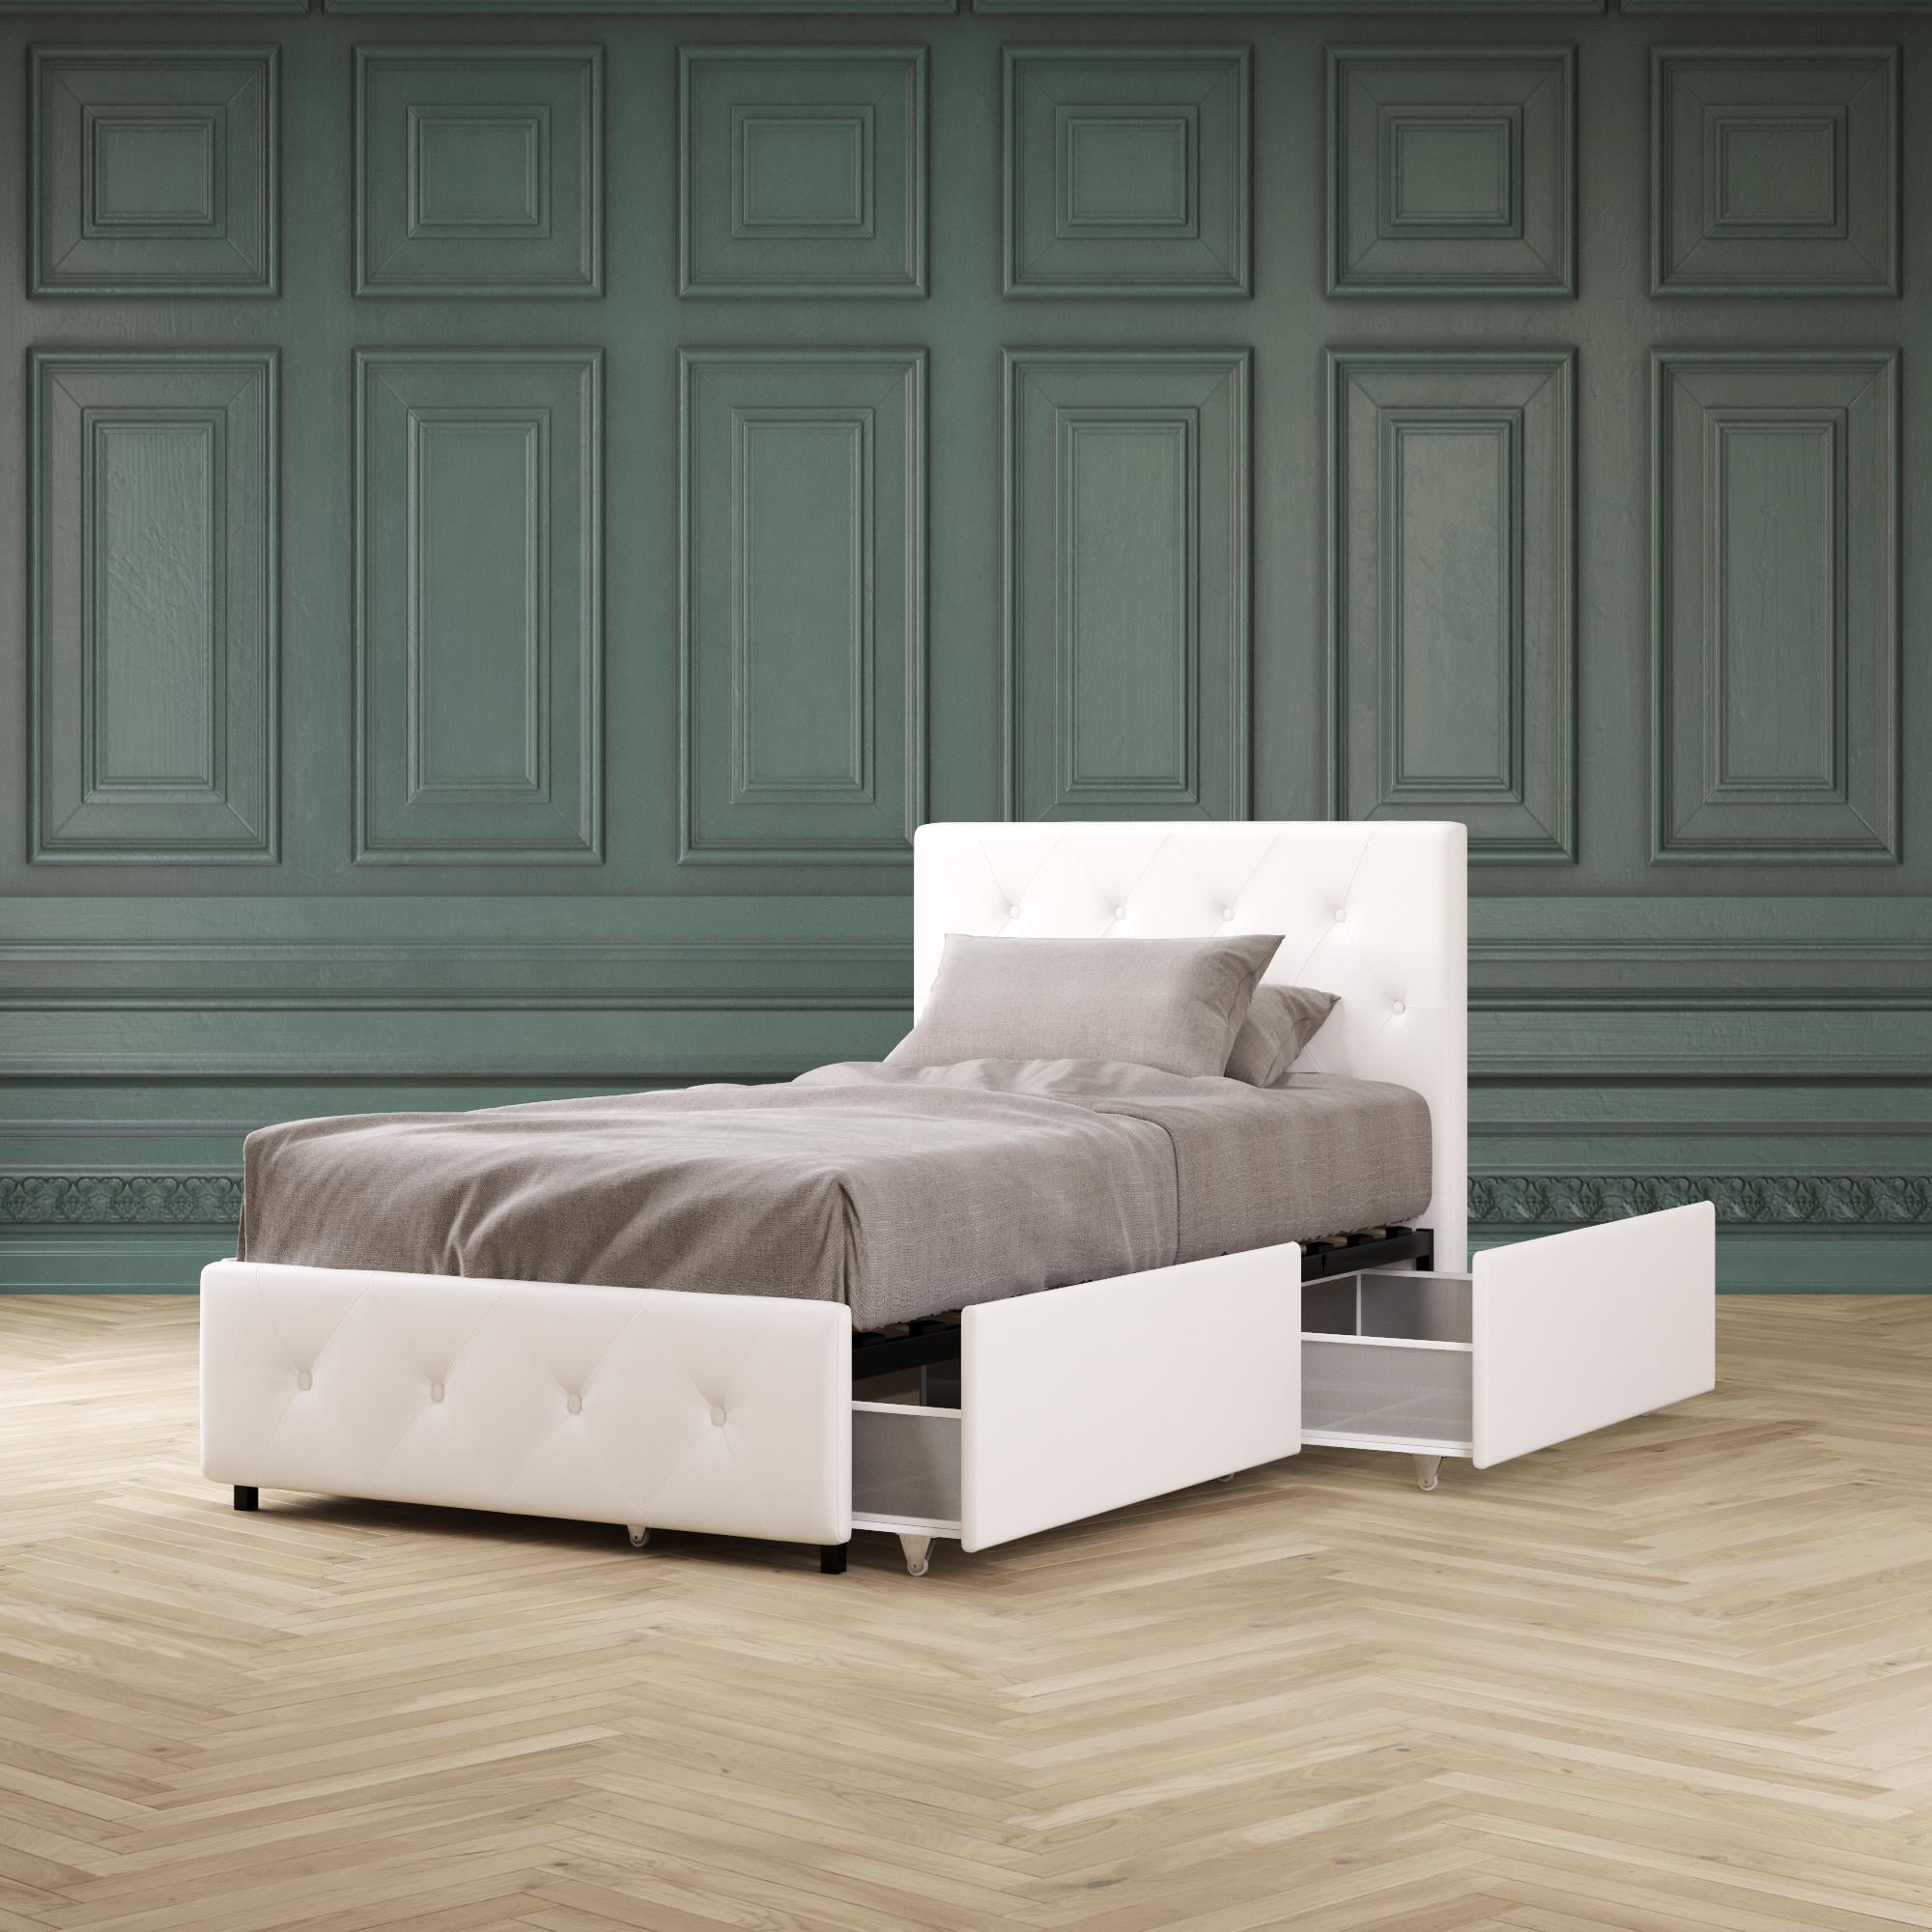 DHP Dean Upholstered Bed with Storage, White Faux Leather, Twin